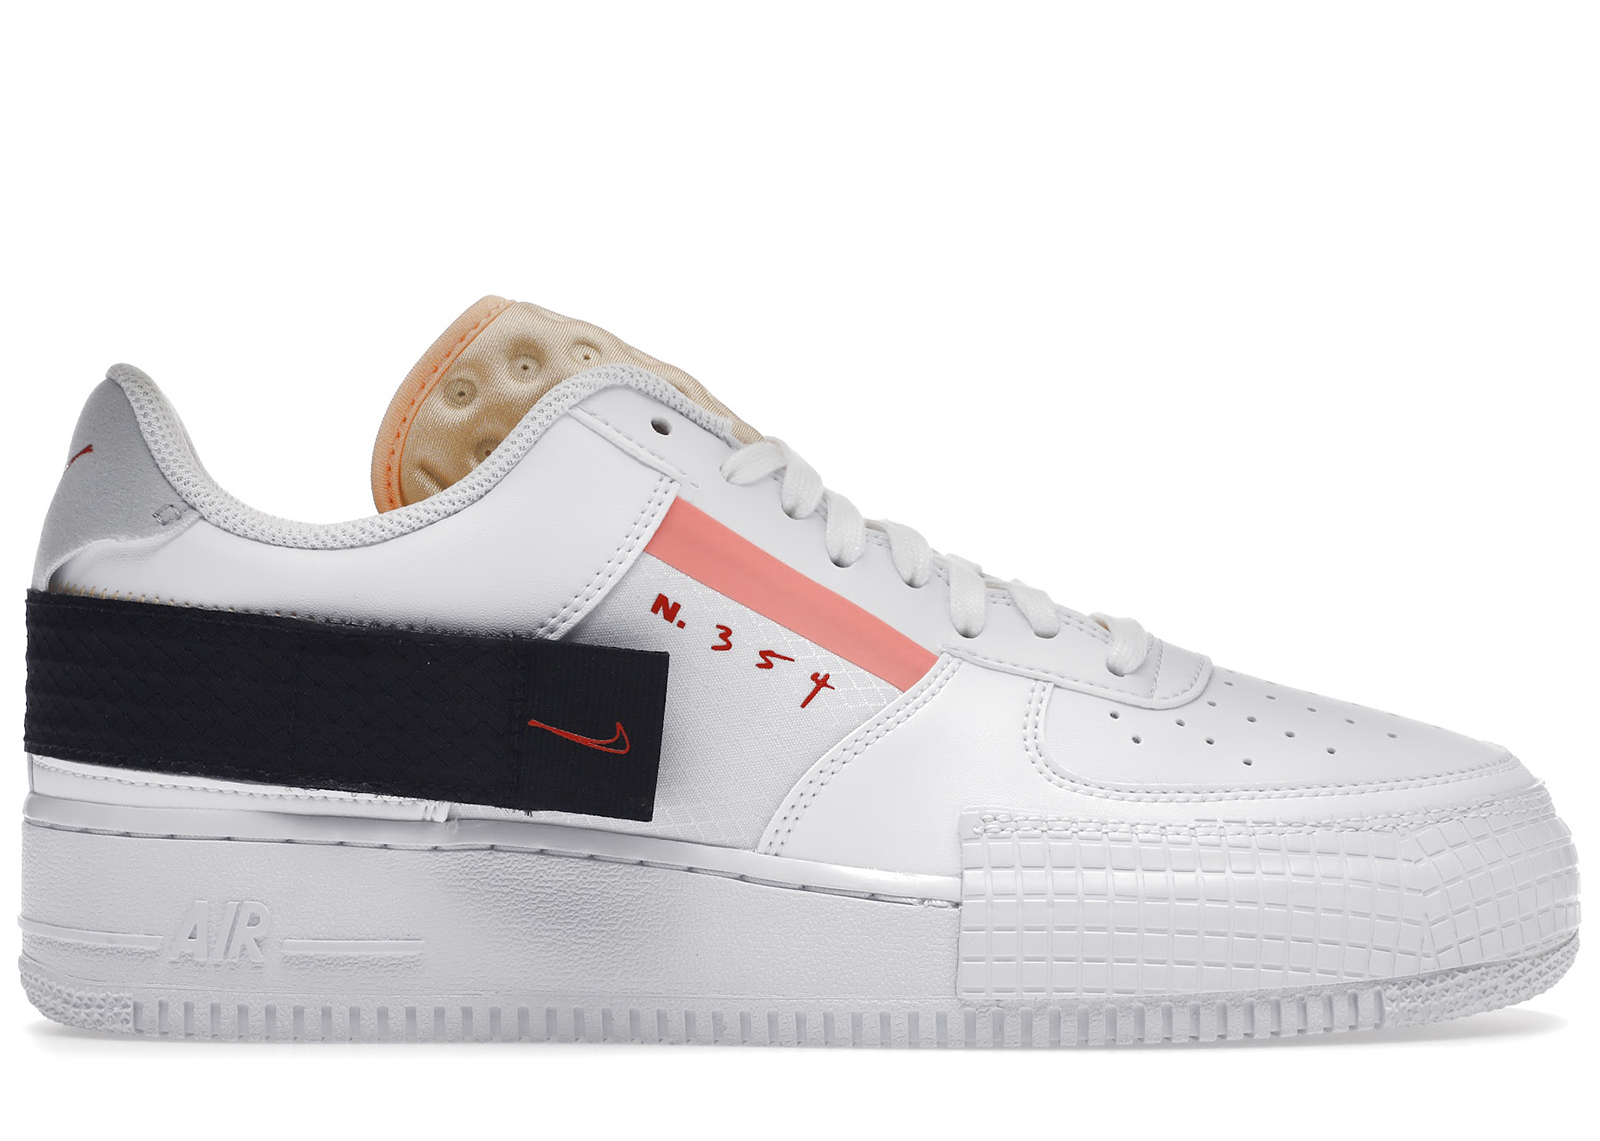 nike air force 1 type casual